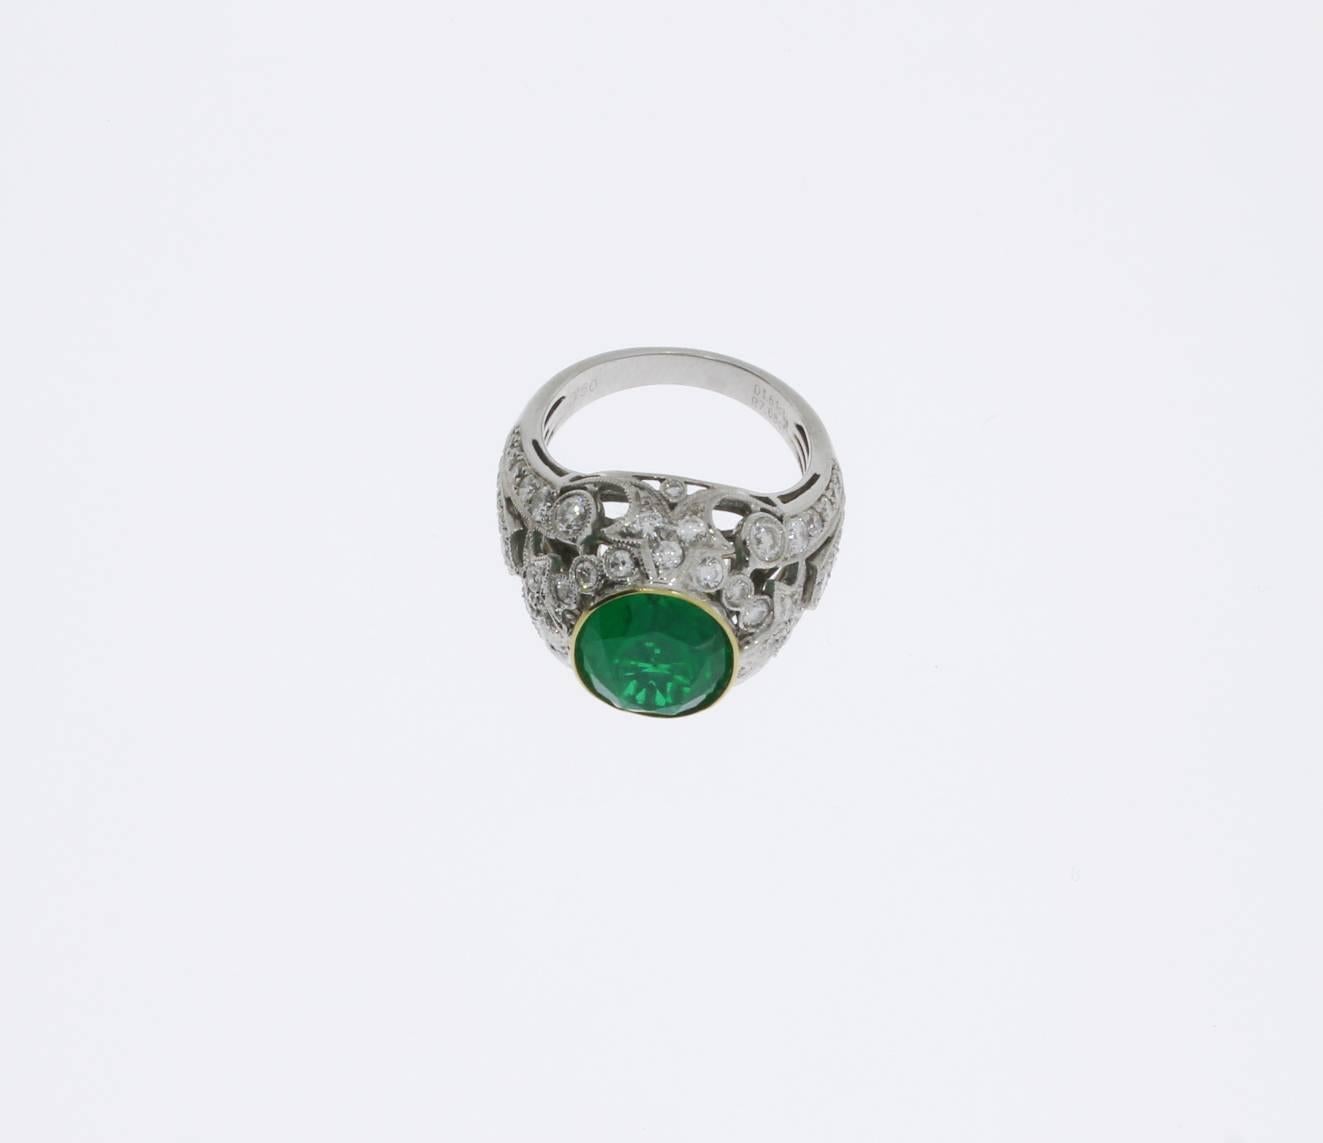 Europe, 1960s-1970s. In Art Deco style. This ladies ring of 18 karat white gold shows an oval shaped Brasilian emerald of 10,30 carat complemented by numerous brilliant-cut diamonds weighing 1,61 ct. Openwork, millegrain setting. Hallmarked inside